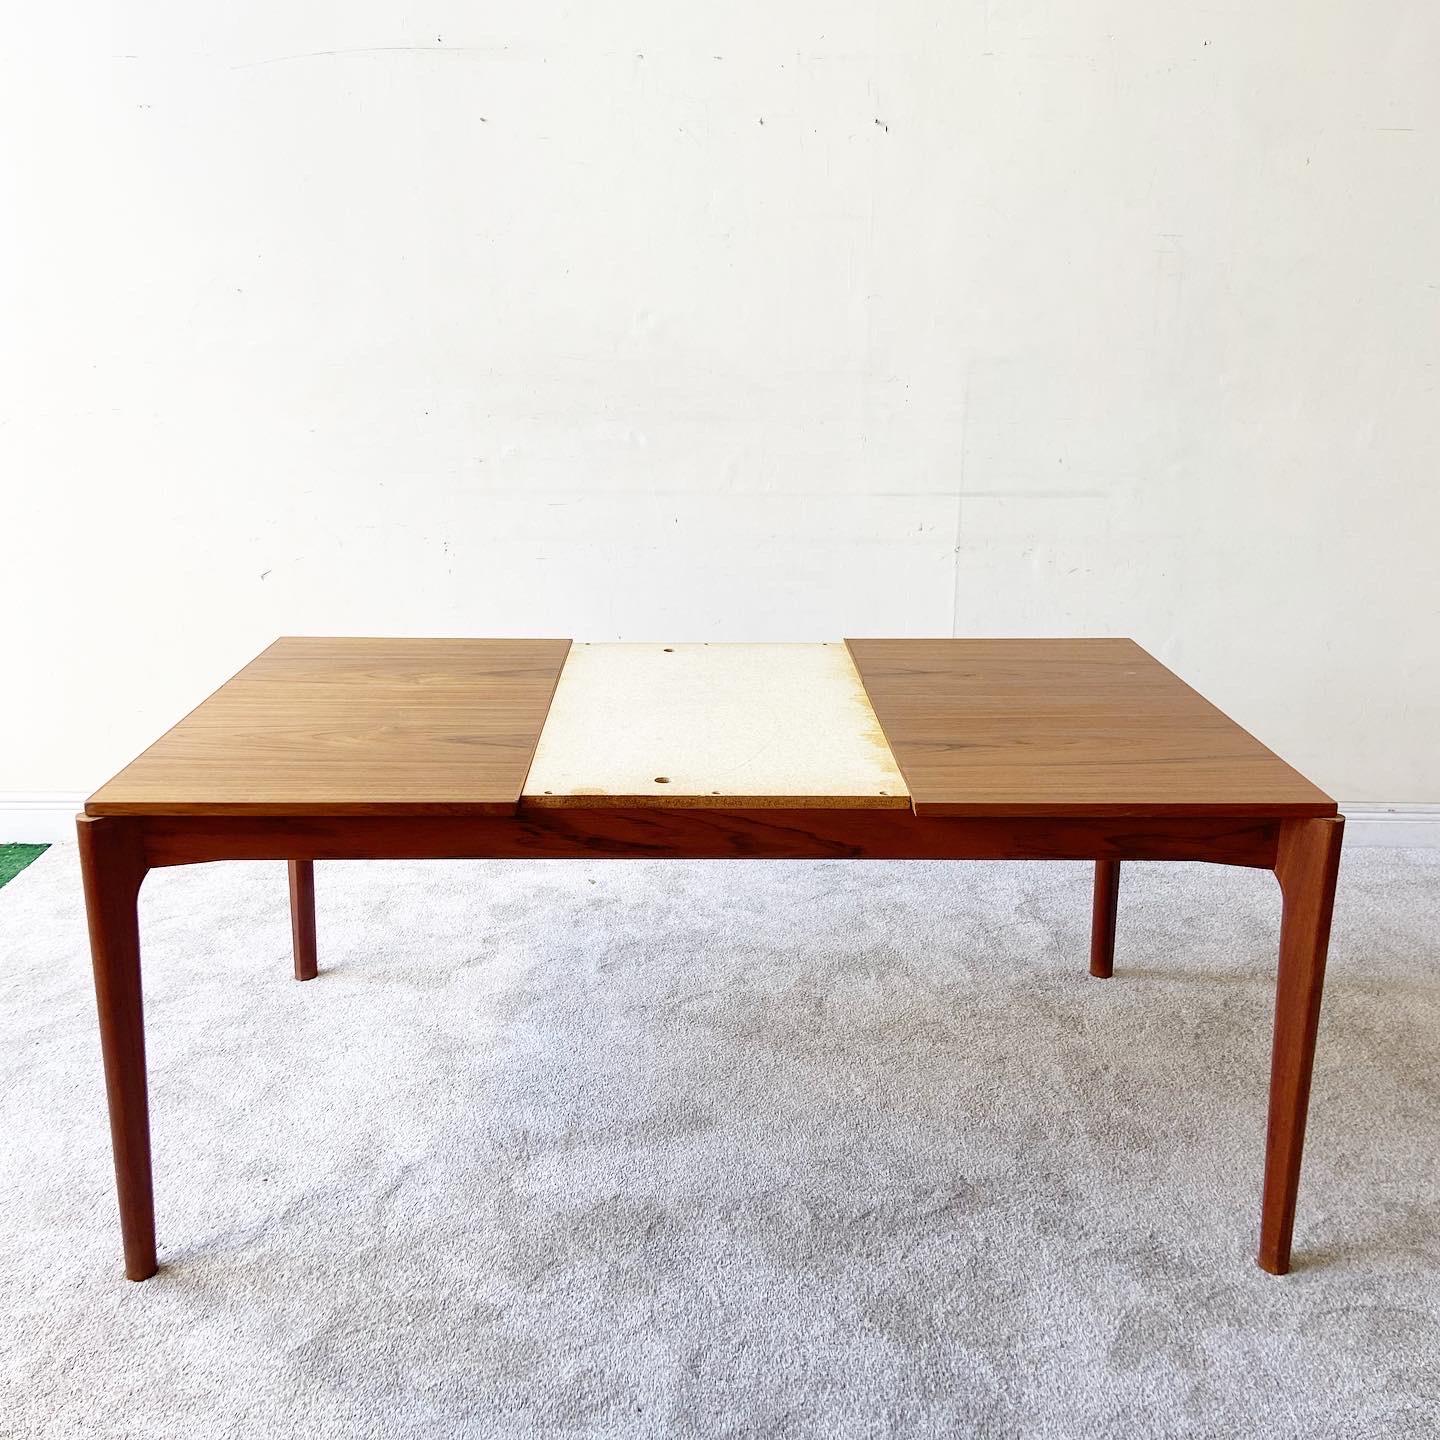 Mid-20th Century Vejle Stole Scandinavian Modern Teak Extension Dining Table by Henning Kjaernulf For Sale